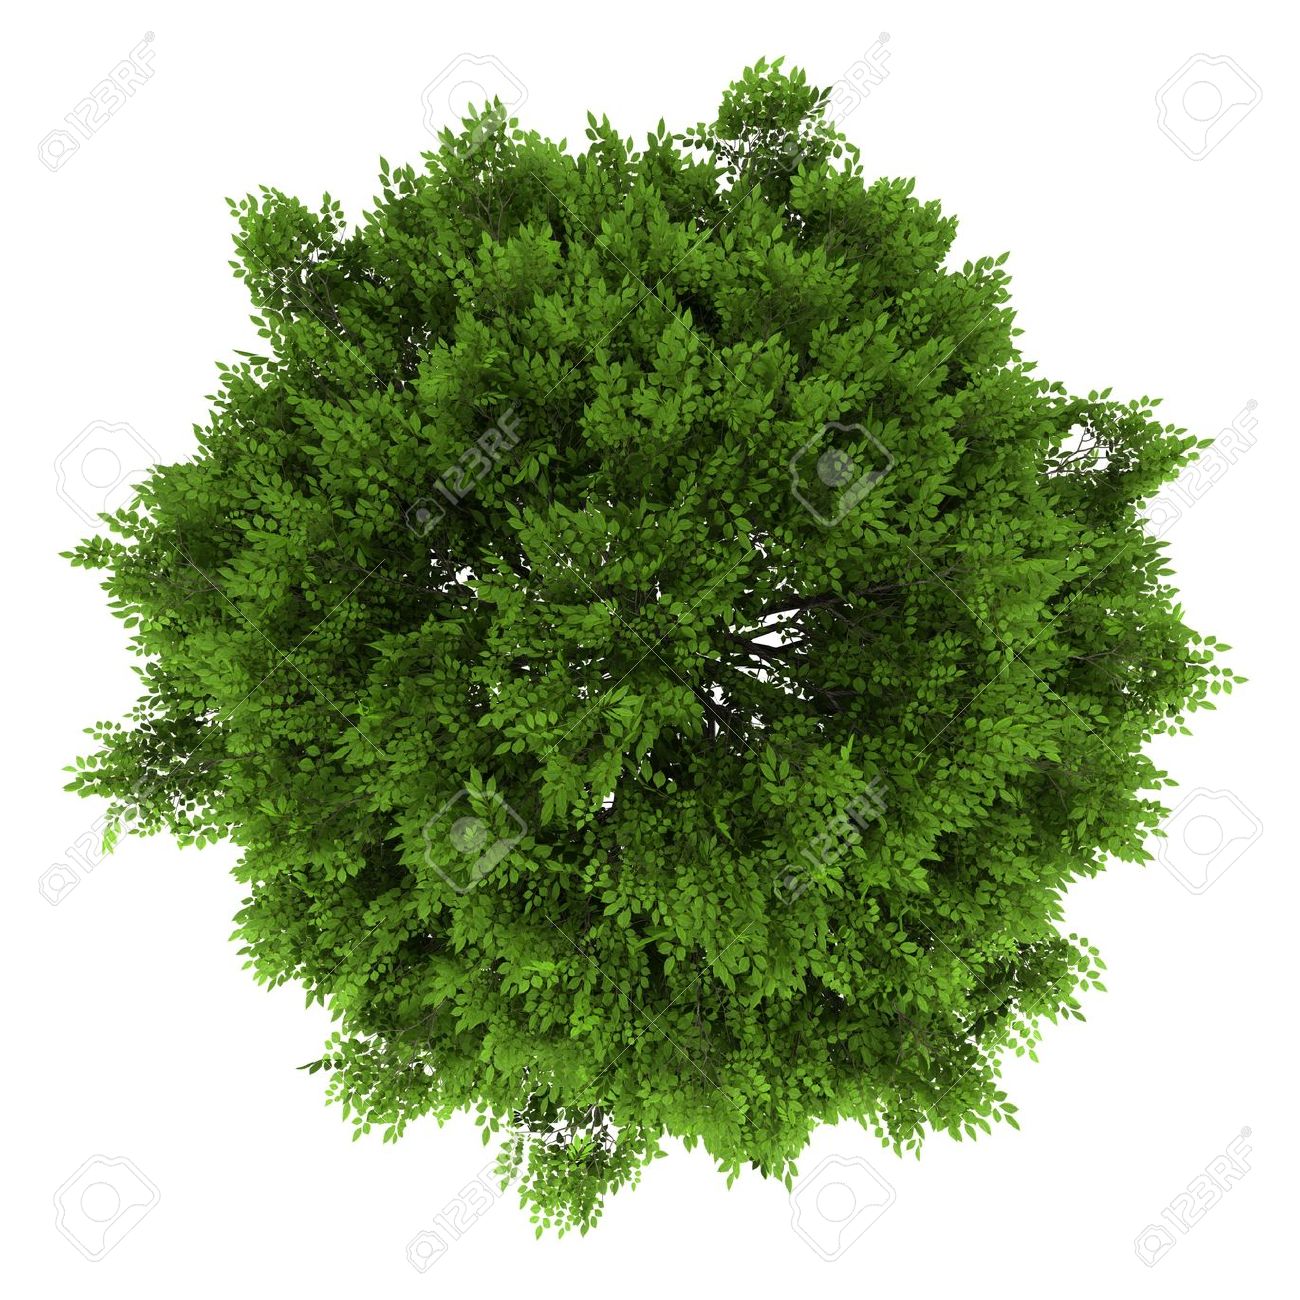 Tree Png Top View - Top View Of European Ash Tree Isolated On White Background Stock Photo   14890712, Transparent background PNG HD thumbnail